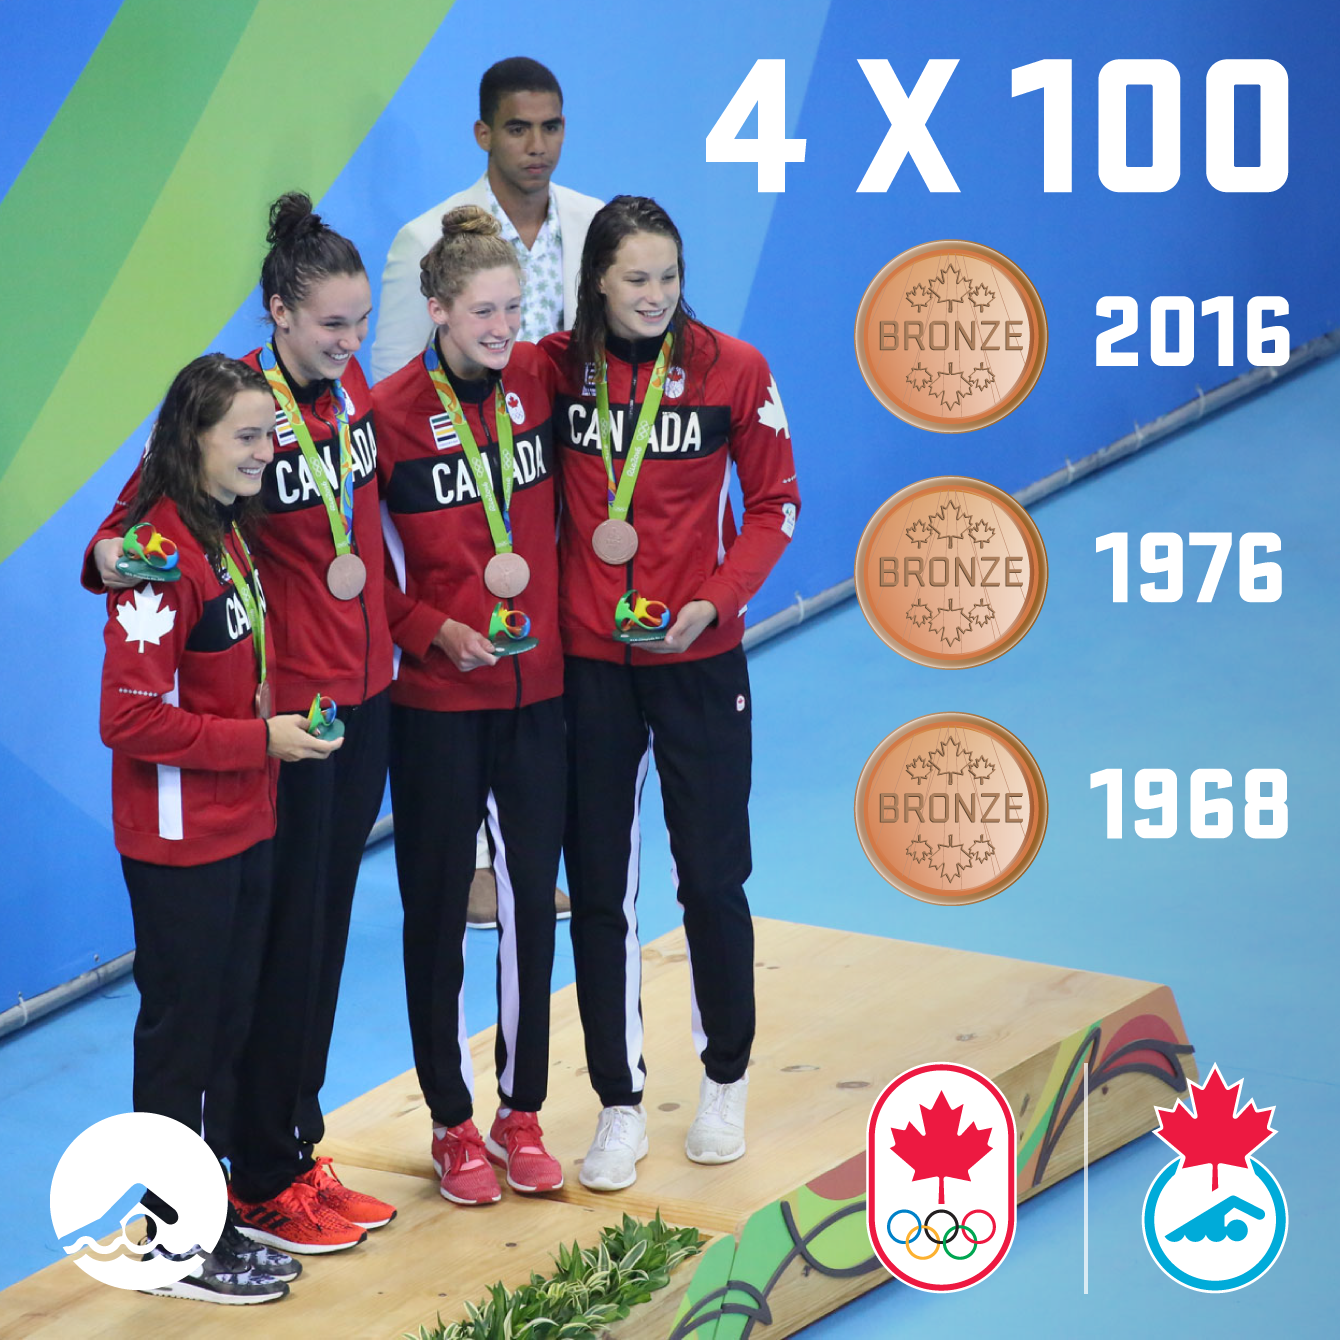 The women's 4x100m freestyle relay team won Canada's first Olympic medal in the event since Montreal 1976 on August 6, 2016. 